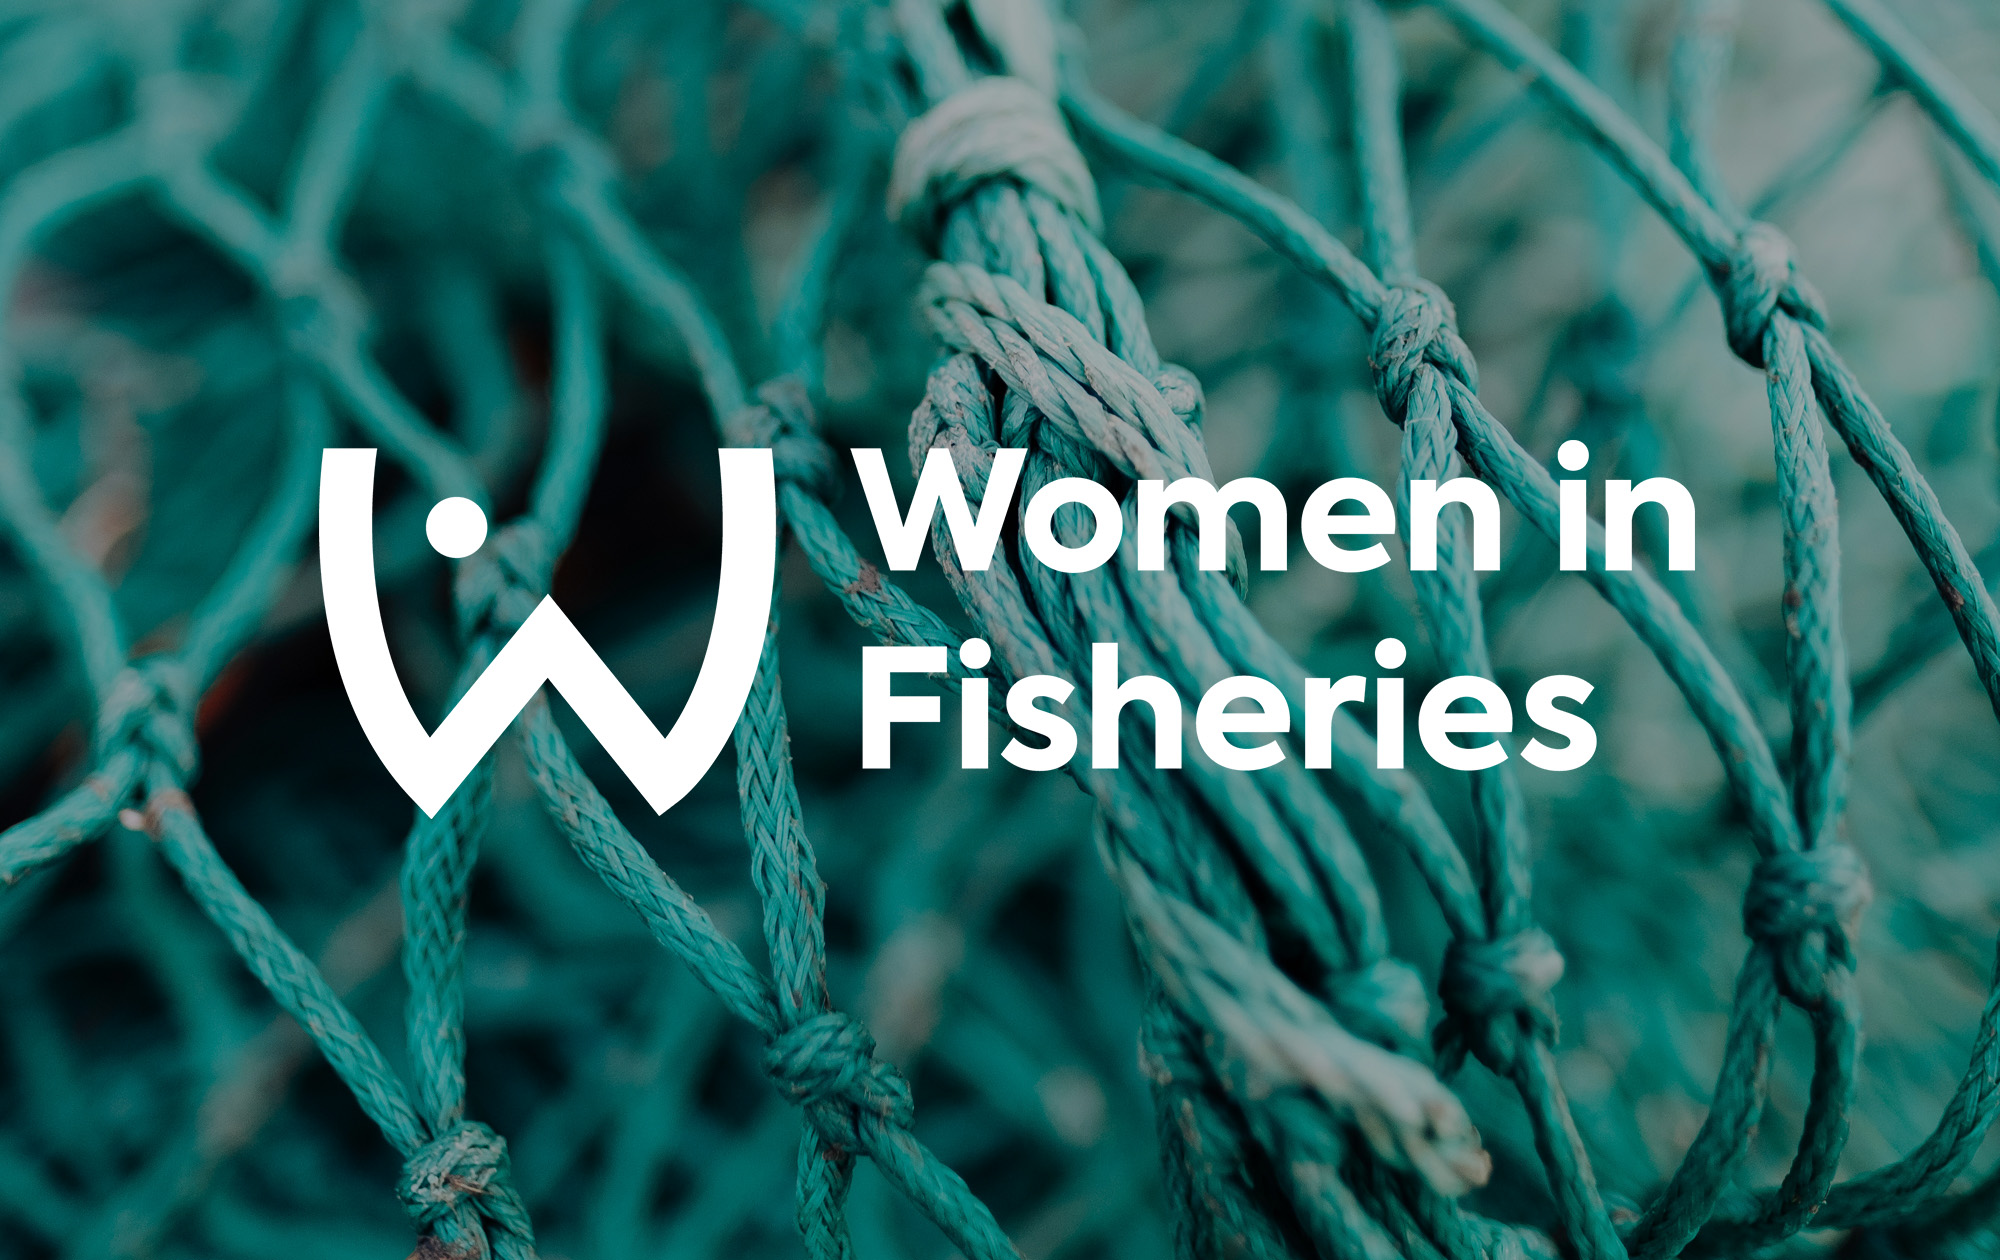 Women in Fisheries website launched